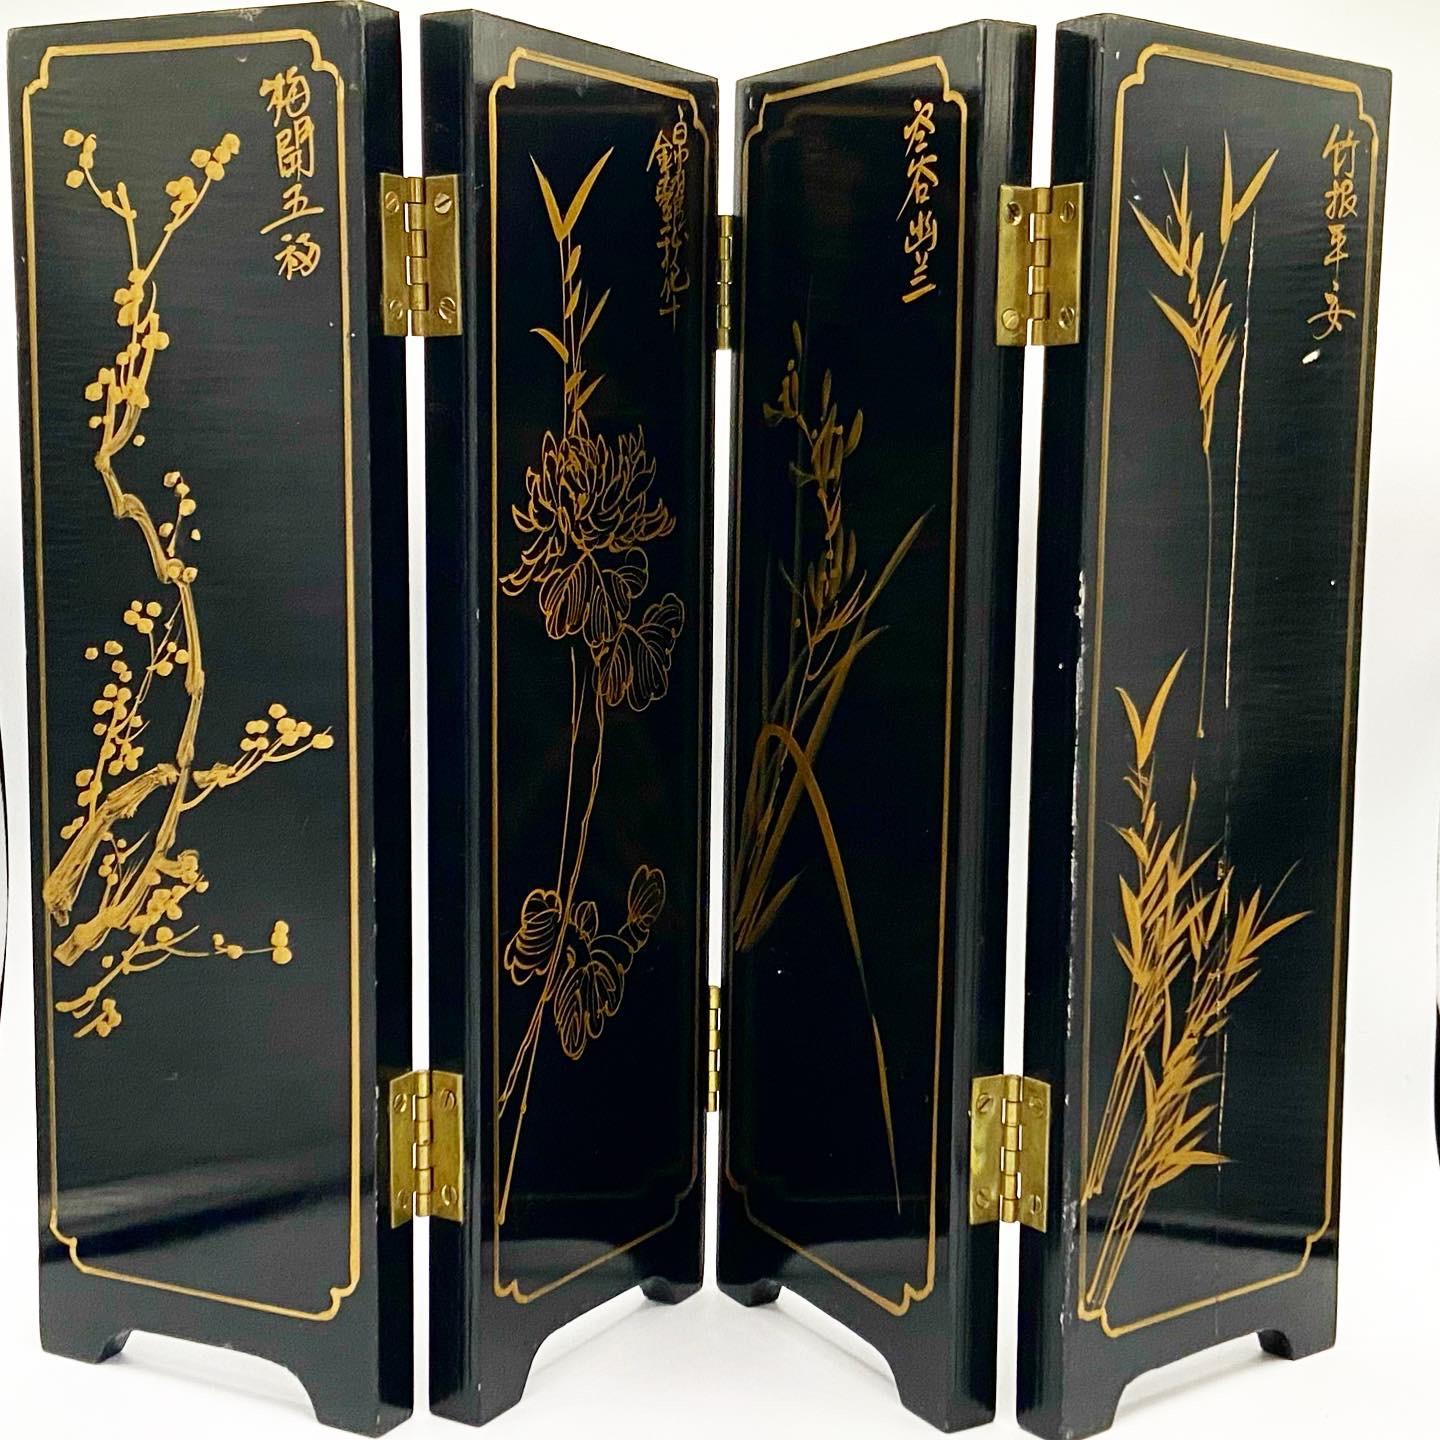 Unique Asian mini divider depicting beautiful birds and plant life. The reverse of each panel is also decorated with Asian paint depictions.

Additional information: 
Material: Wood
Color: Black
Style: Chinoiserie
Time period: early 20th